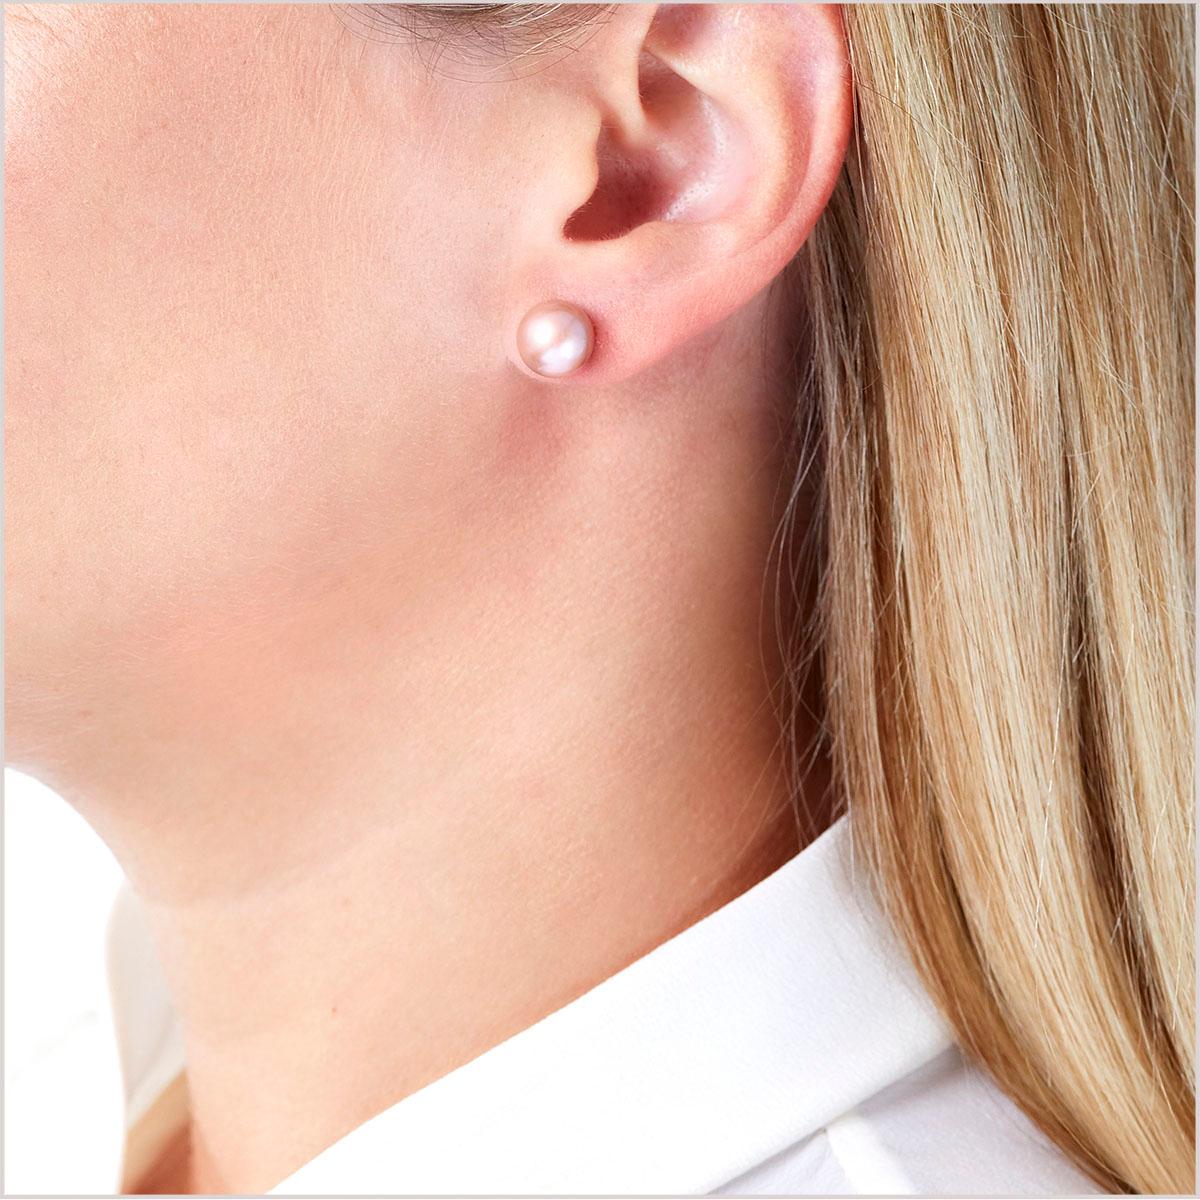 Set on luxurious 18 Karat White Gold, this pair of Yoko London Earring Studs features two pretty Pink Freshwater Pearls at their forefront, which have been hand-selected for their soft hue, gleaming lustre and smooth surface appearance.  
Style with